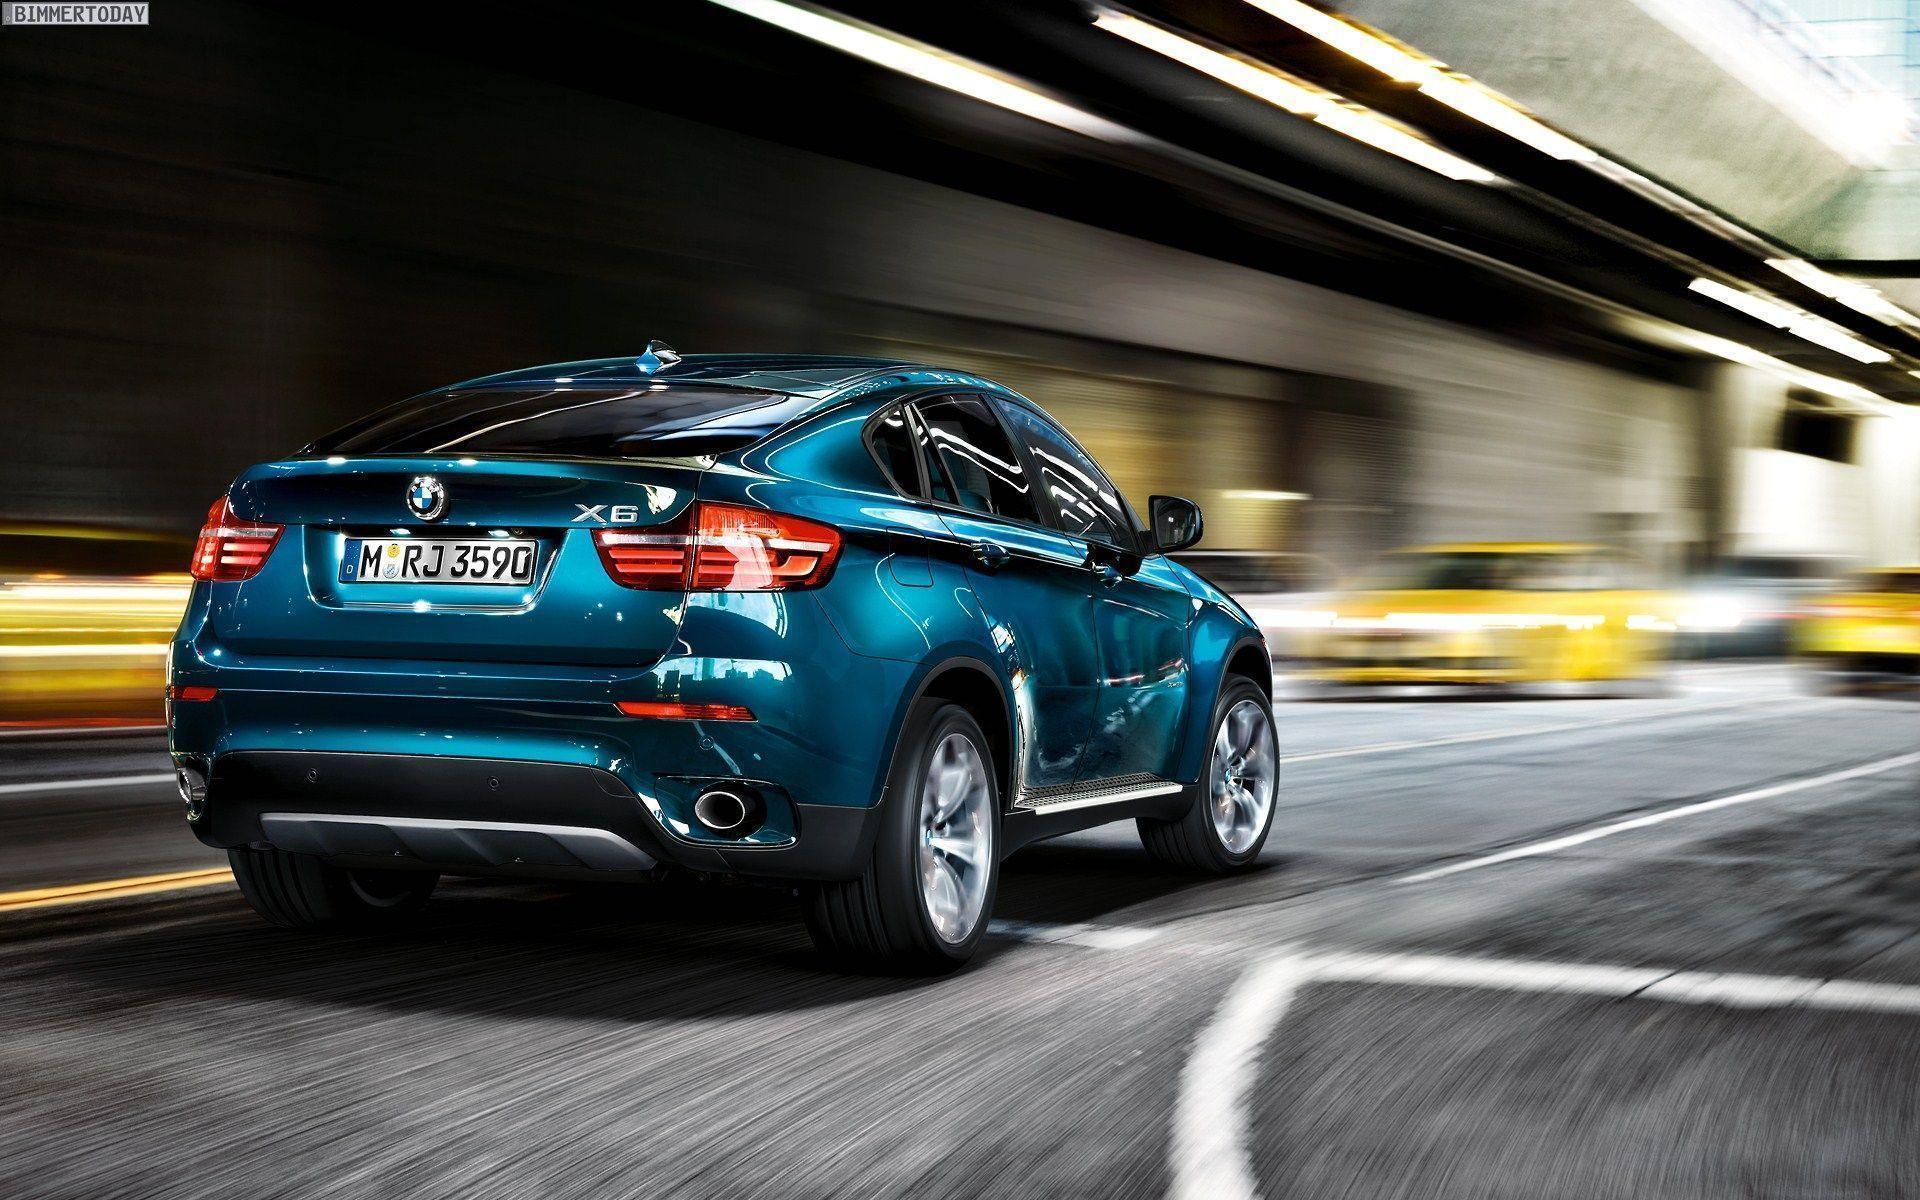 Bmw X6 Wallpapers Wallpaper Cave